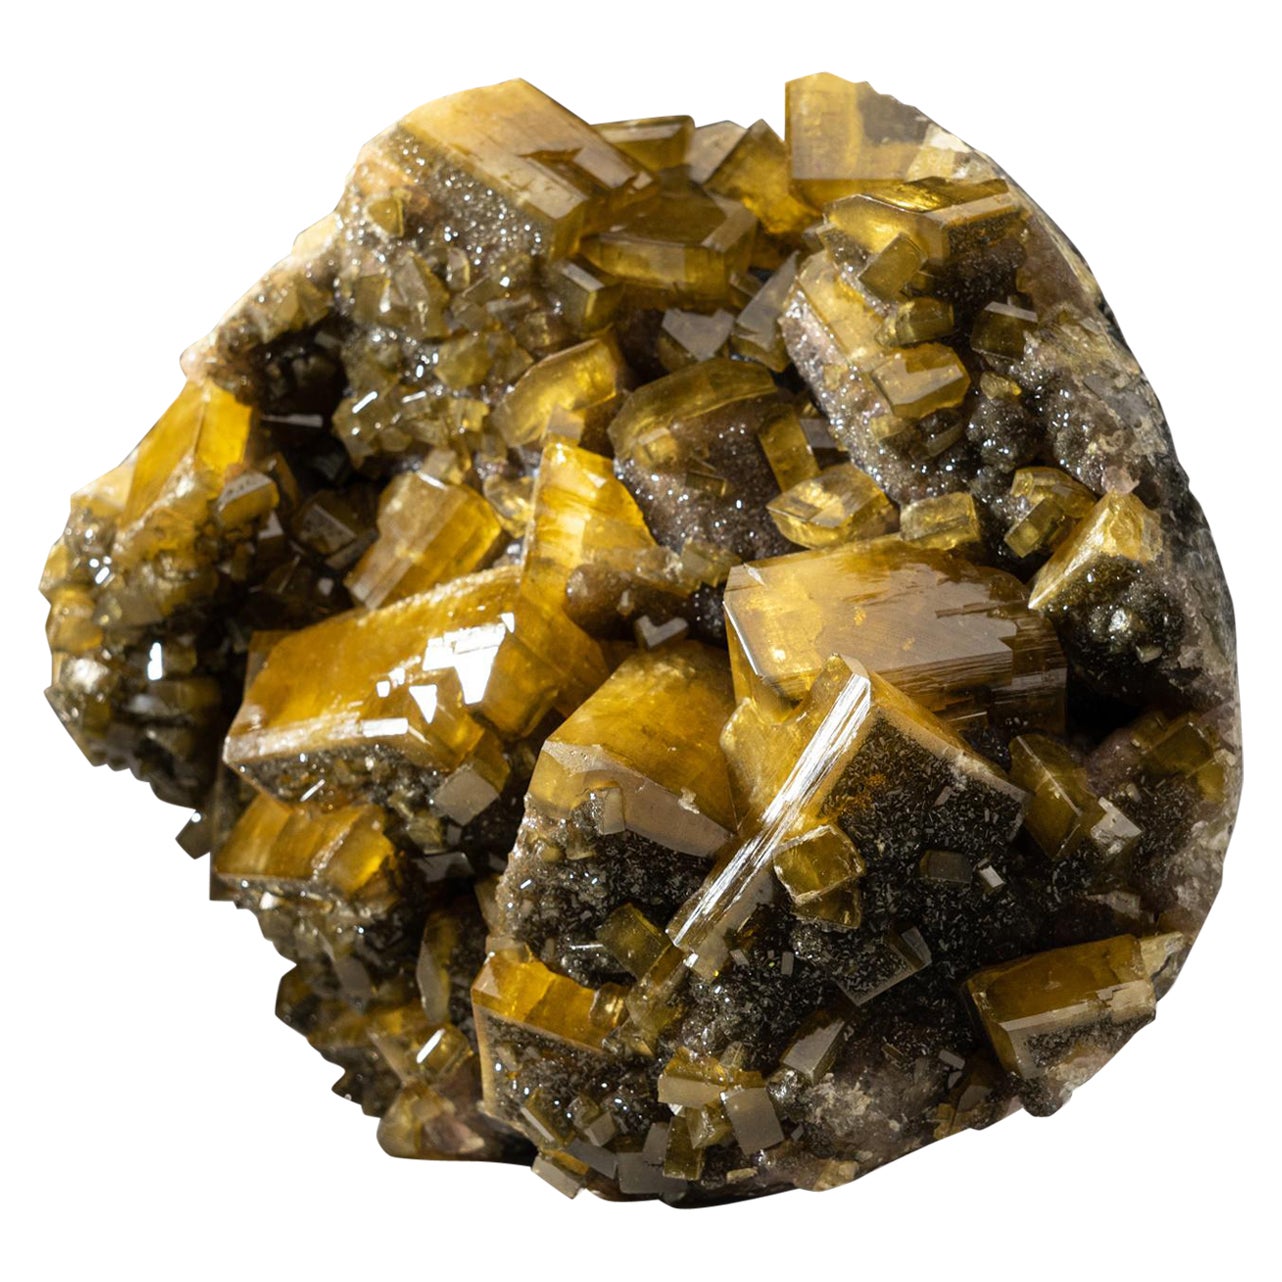 Natural Golden Barite Mineral with Marcasite Crystals From Guangxi, China For Sale